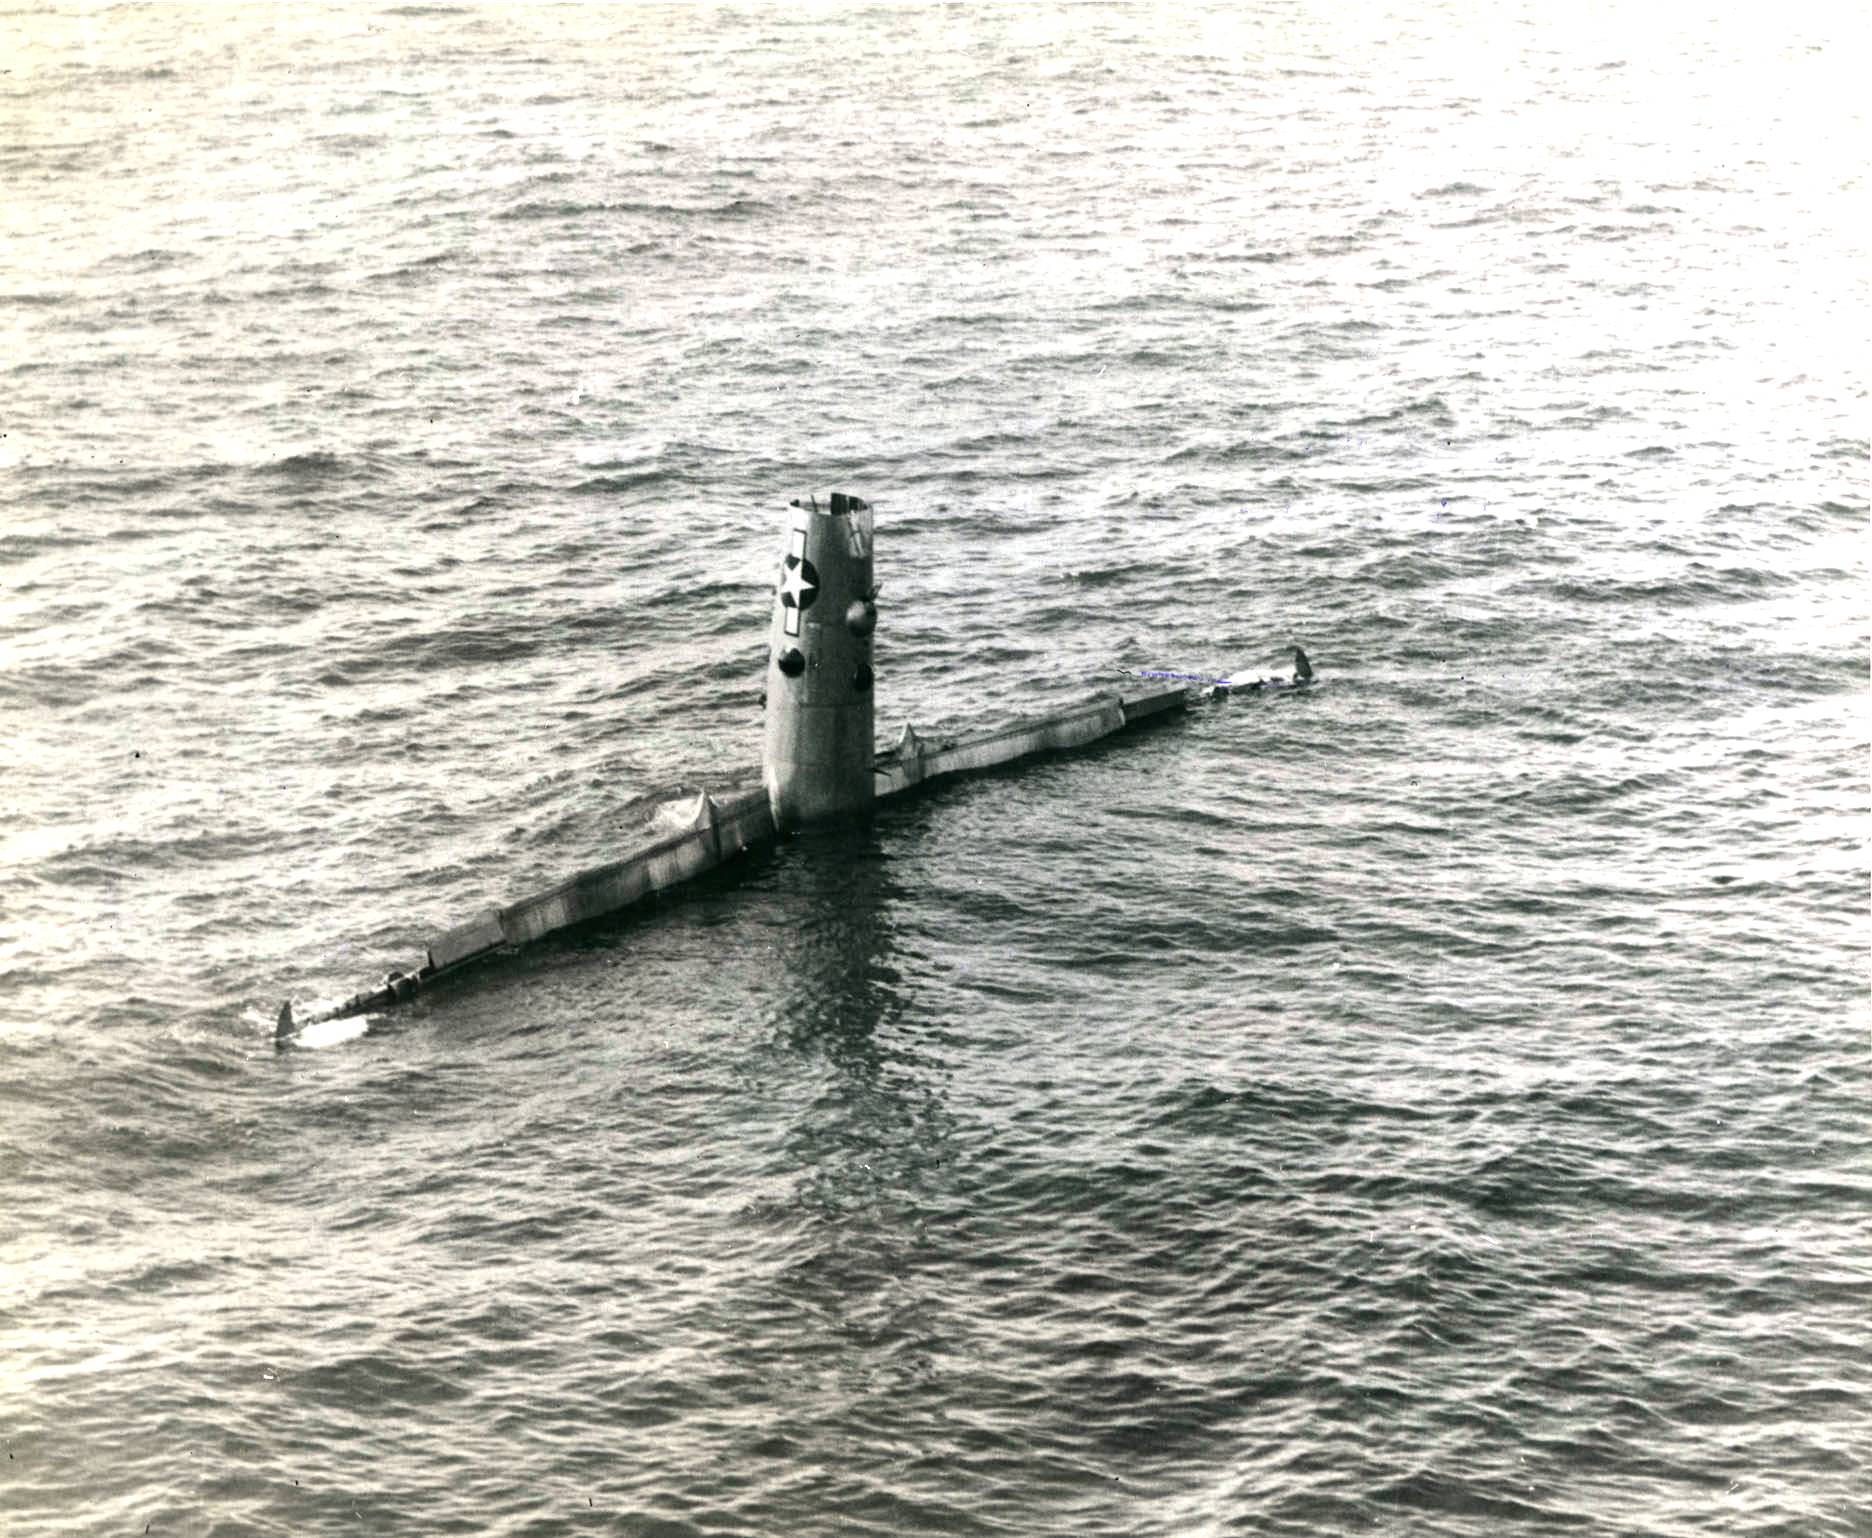 B-29 Superfortress bomber 'City of Pittsfield/Two Passes and a Crap' of 39th BG of US 61st BS about to sink after being ditched north of Guam, Mariana Islands, 15 May 1945; she was damaged by flak over Nagoya, Japan